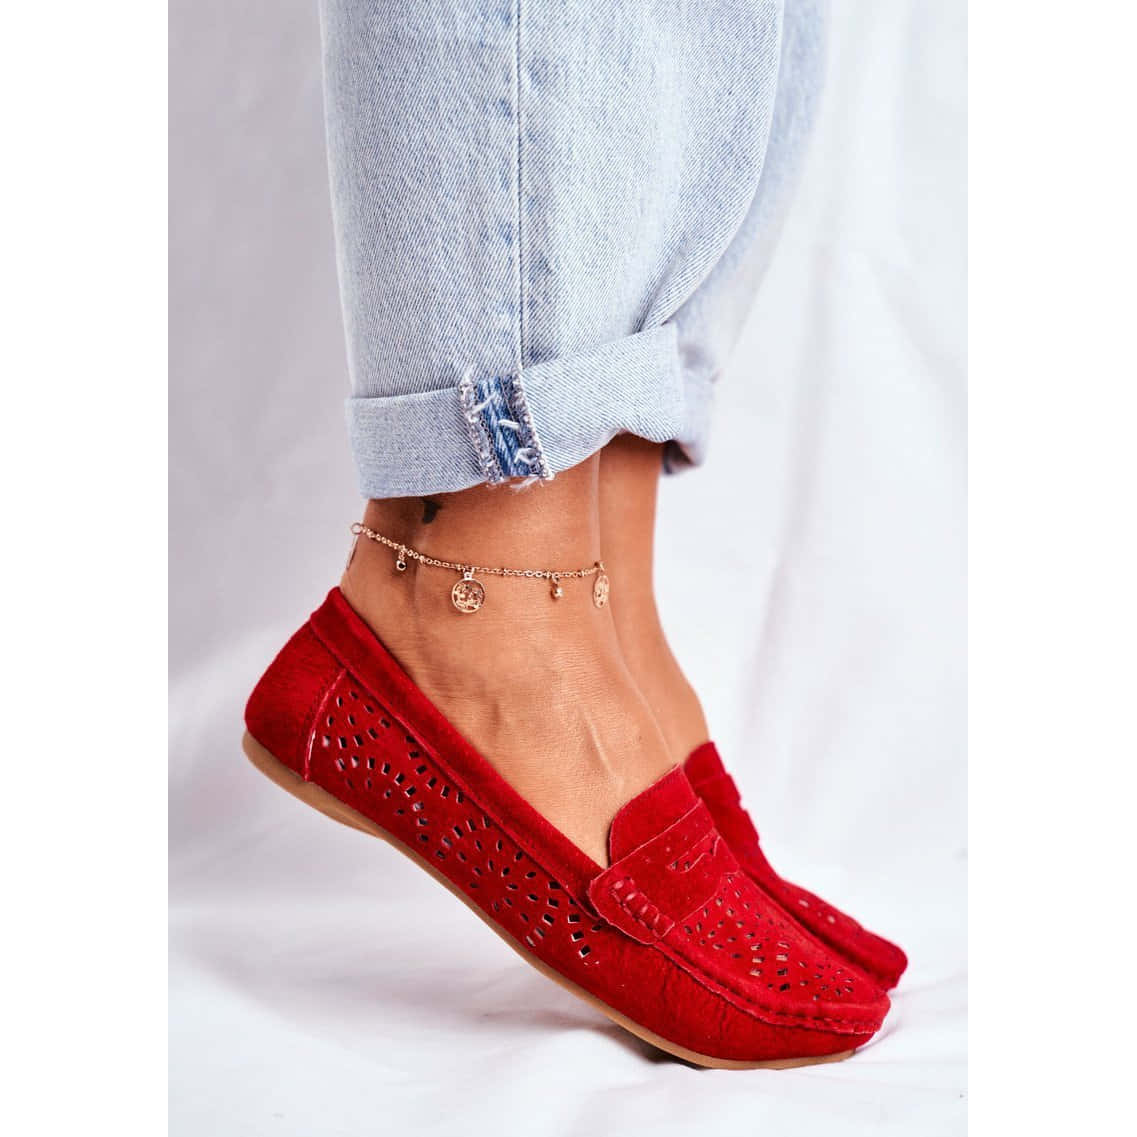 Trendy Red Shoes on a Wooden Floor Wallpaper